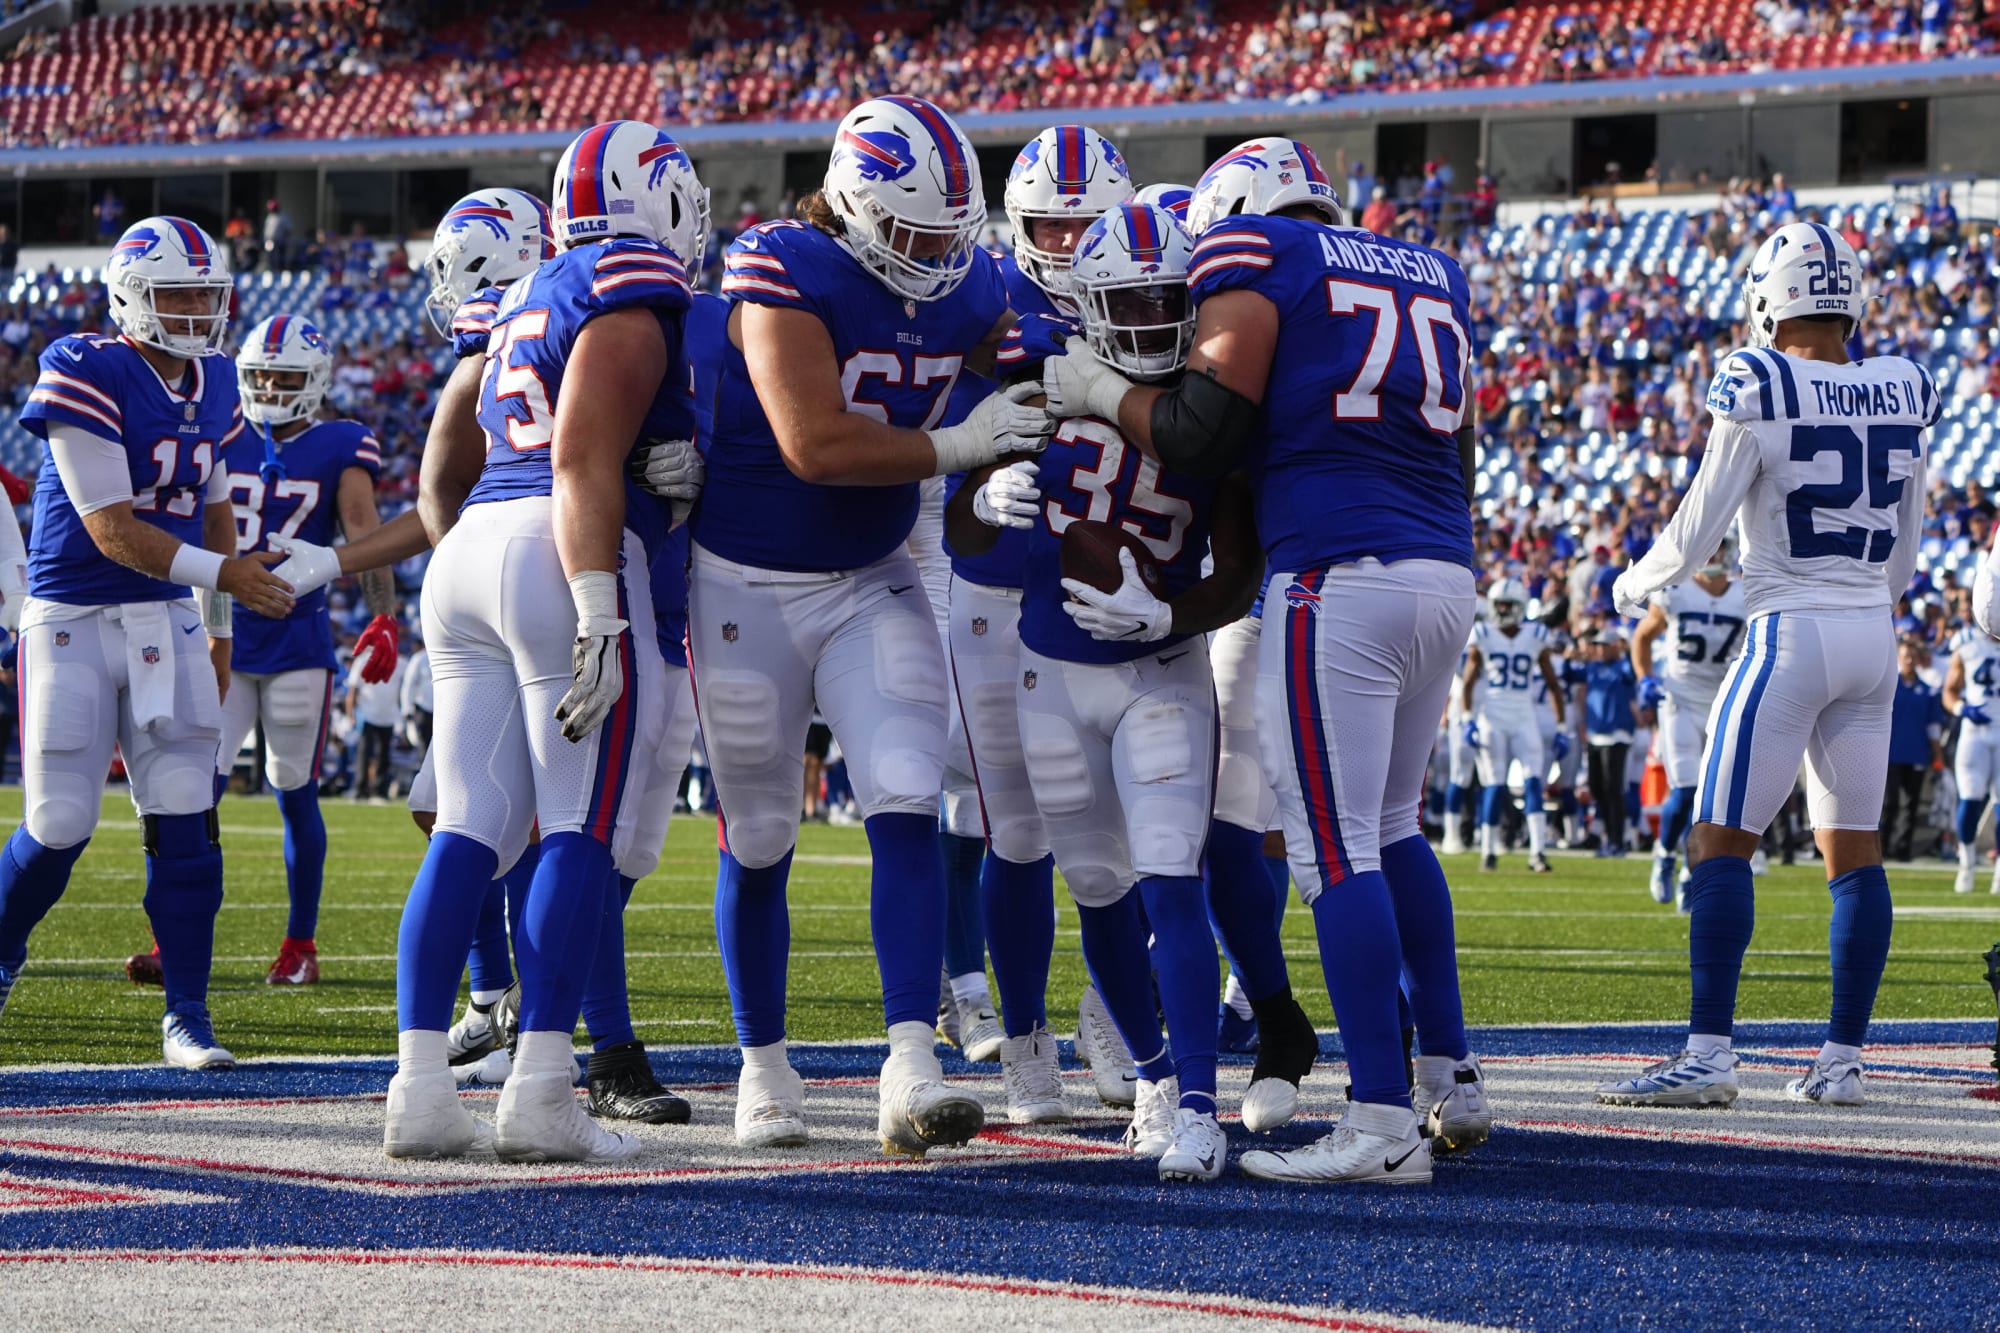 53man roster projections for Buffalo Bills after first preseason game